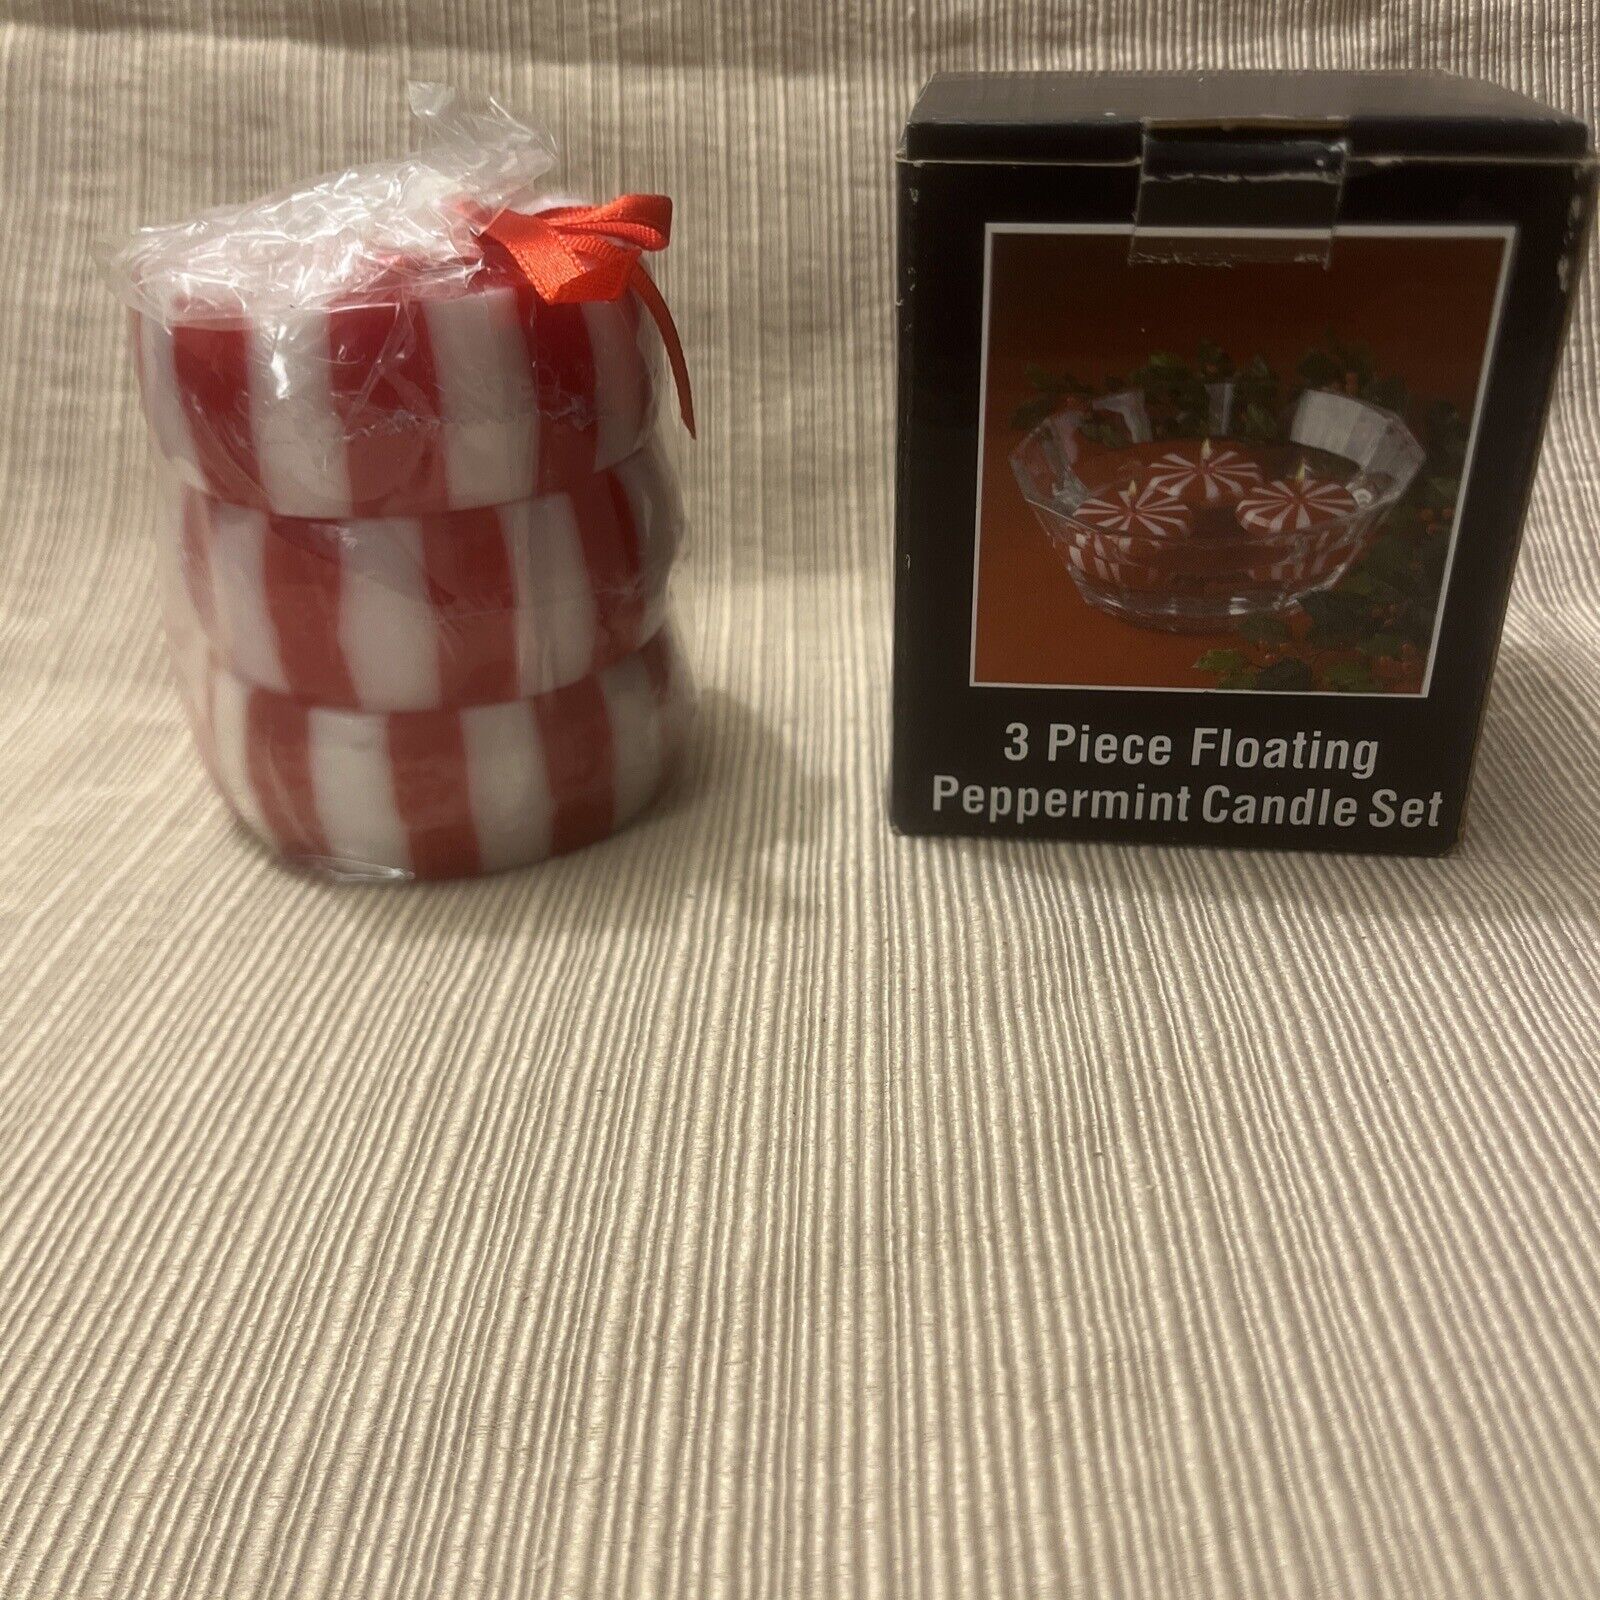 3 Piece Floating Peppermint Candle Set (NIB) 